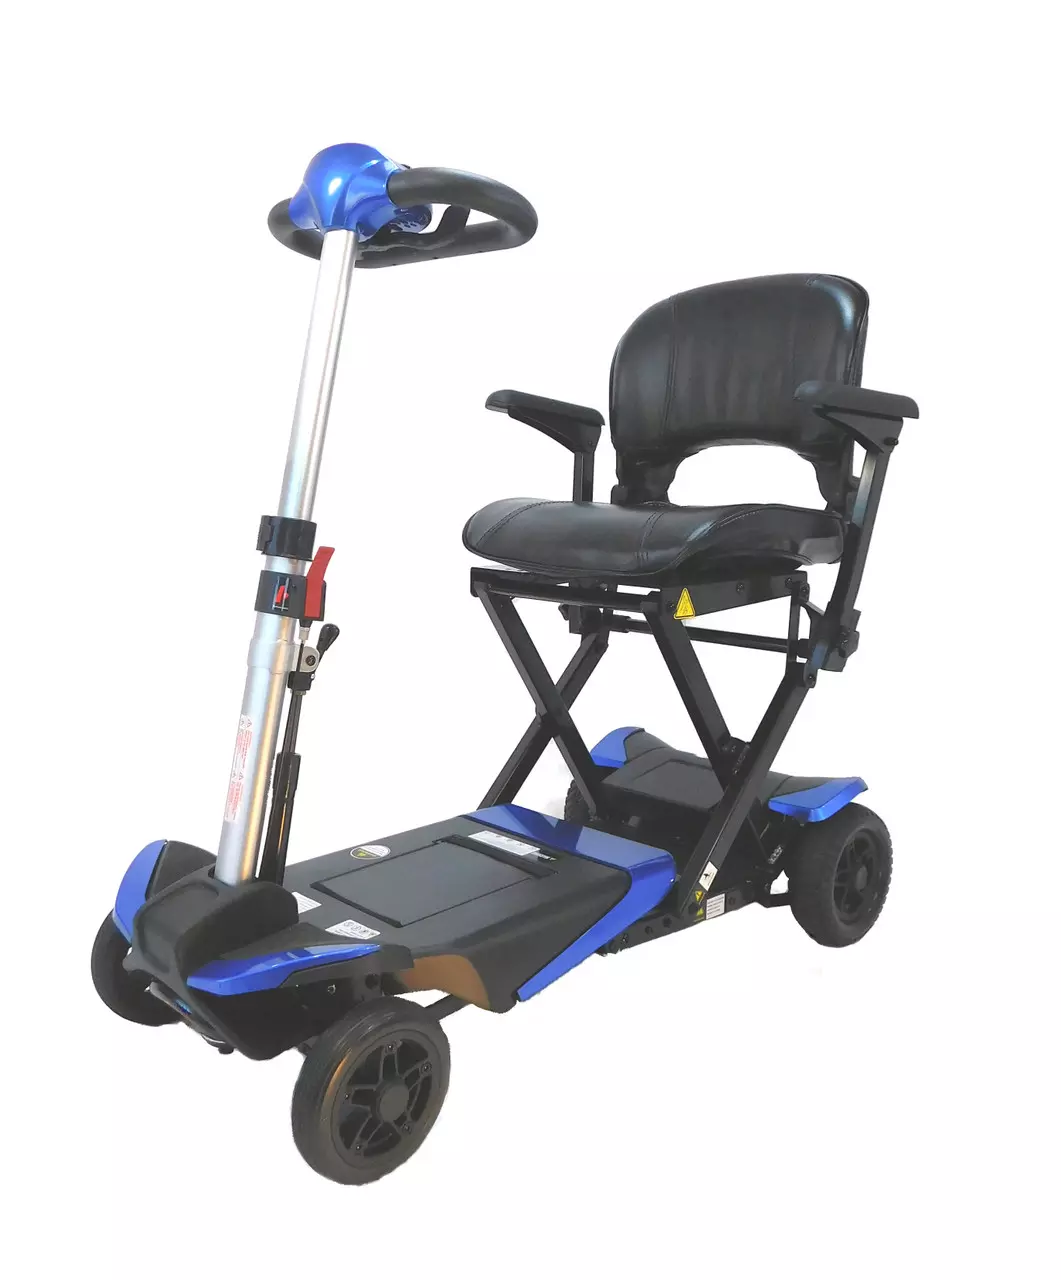 Solax Transformer Automatic Folding Scooter